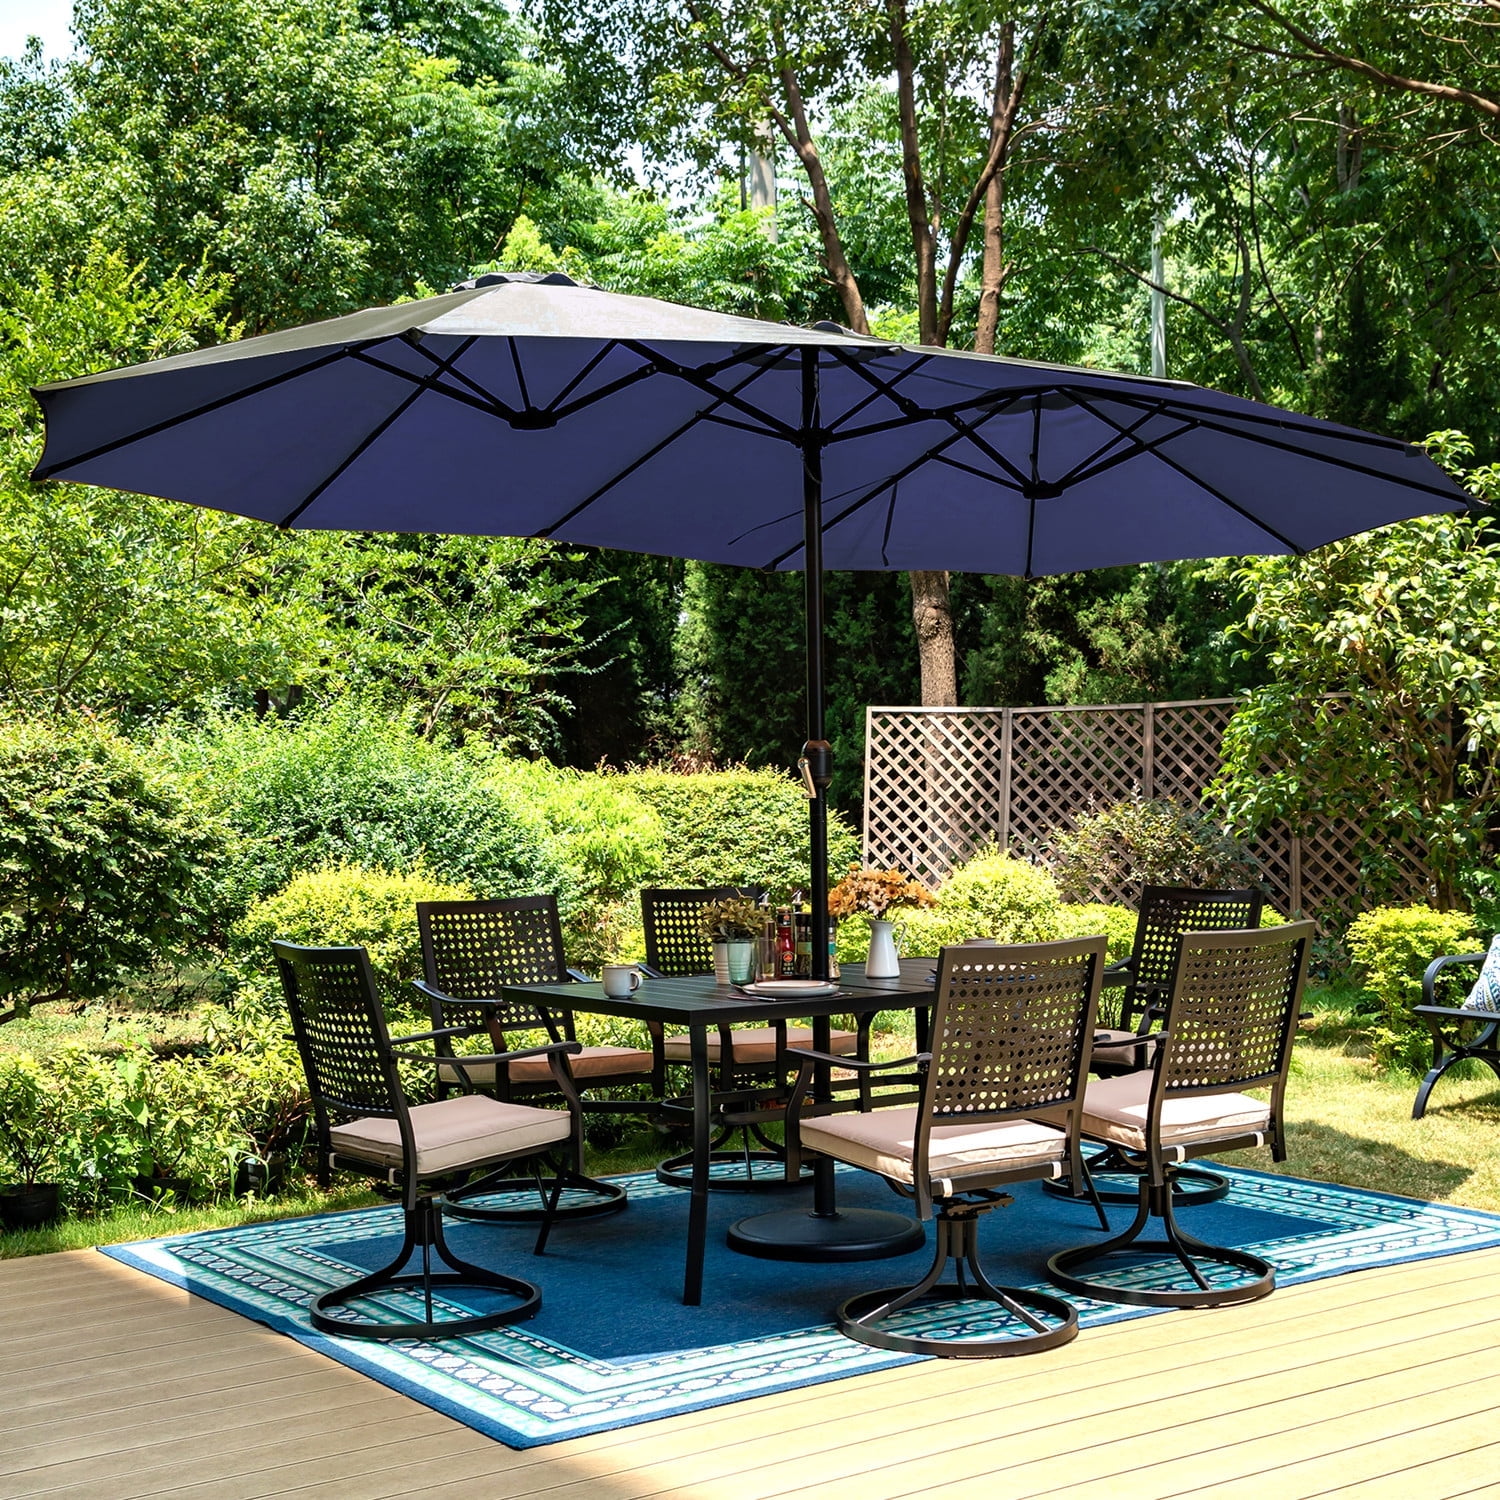 Summit Living 15 FT  Double-Sided Patio Umbrella with Base Large Outdoor Table Umbrella Navy Blue - image 1 of 11